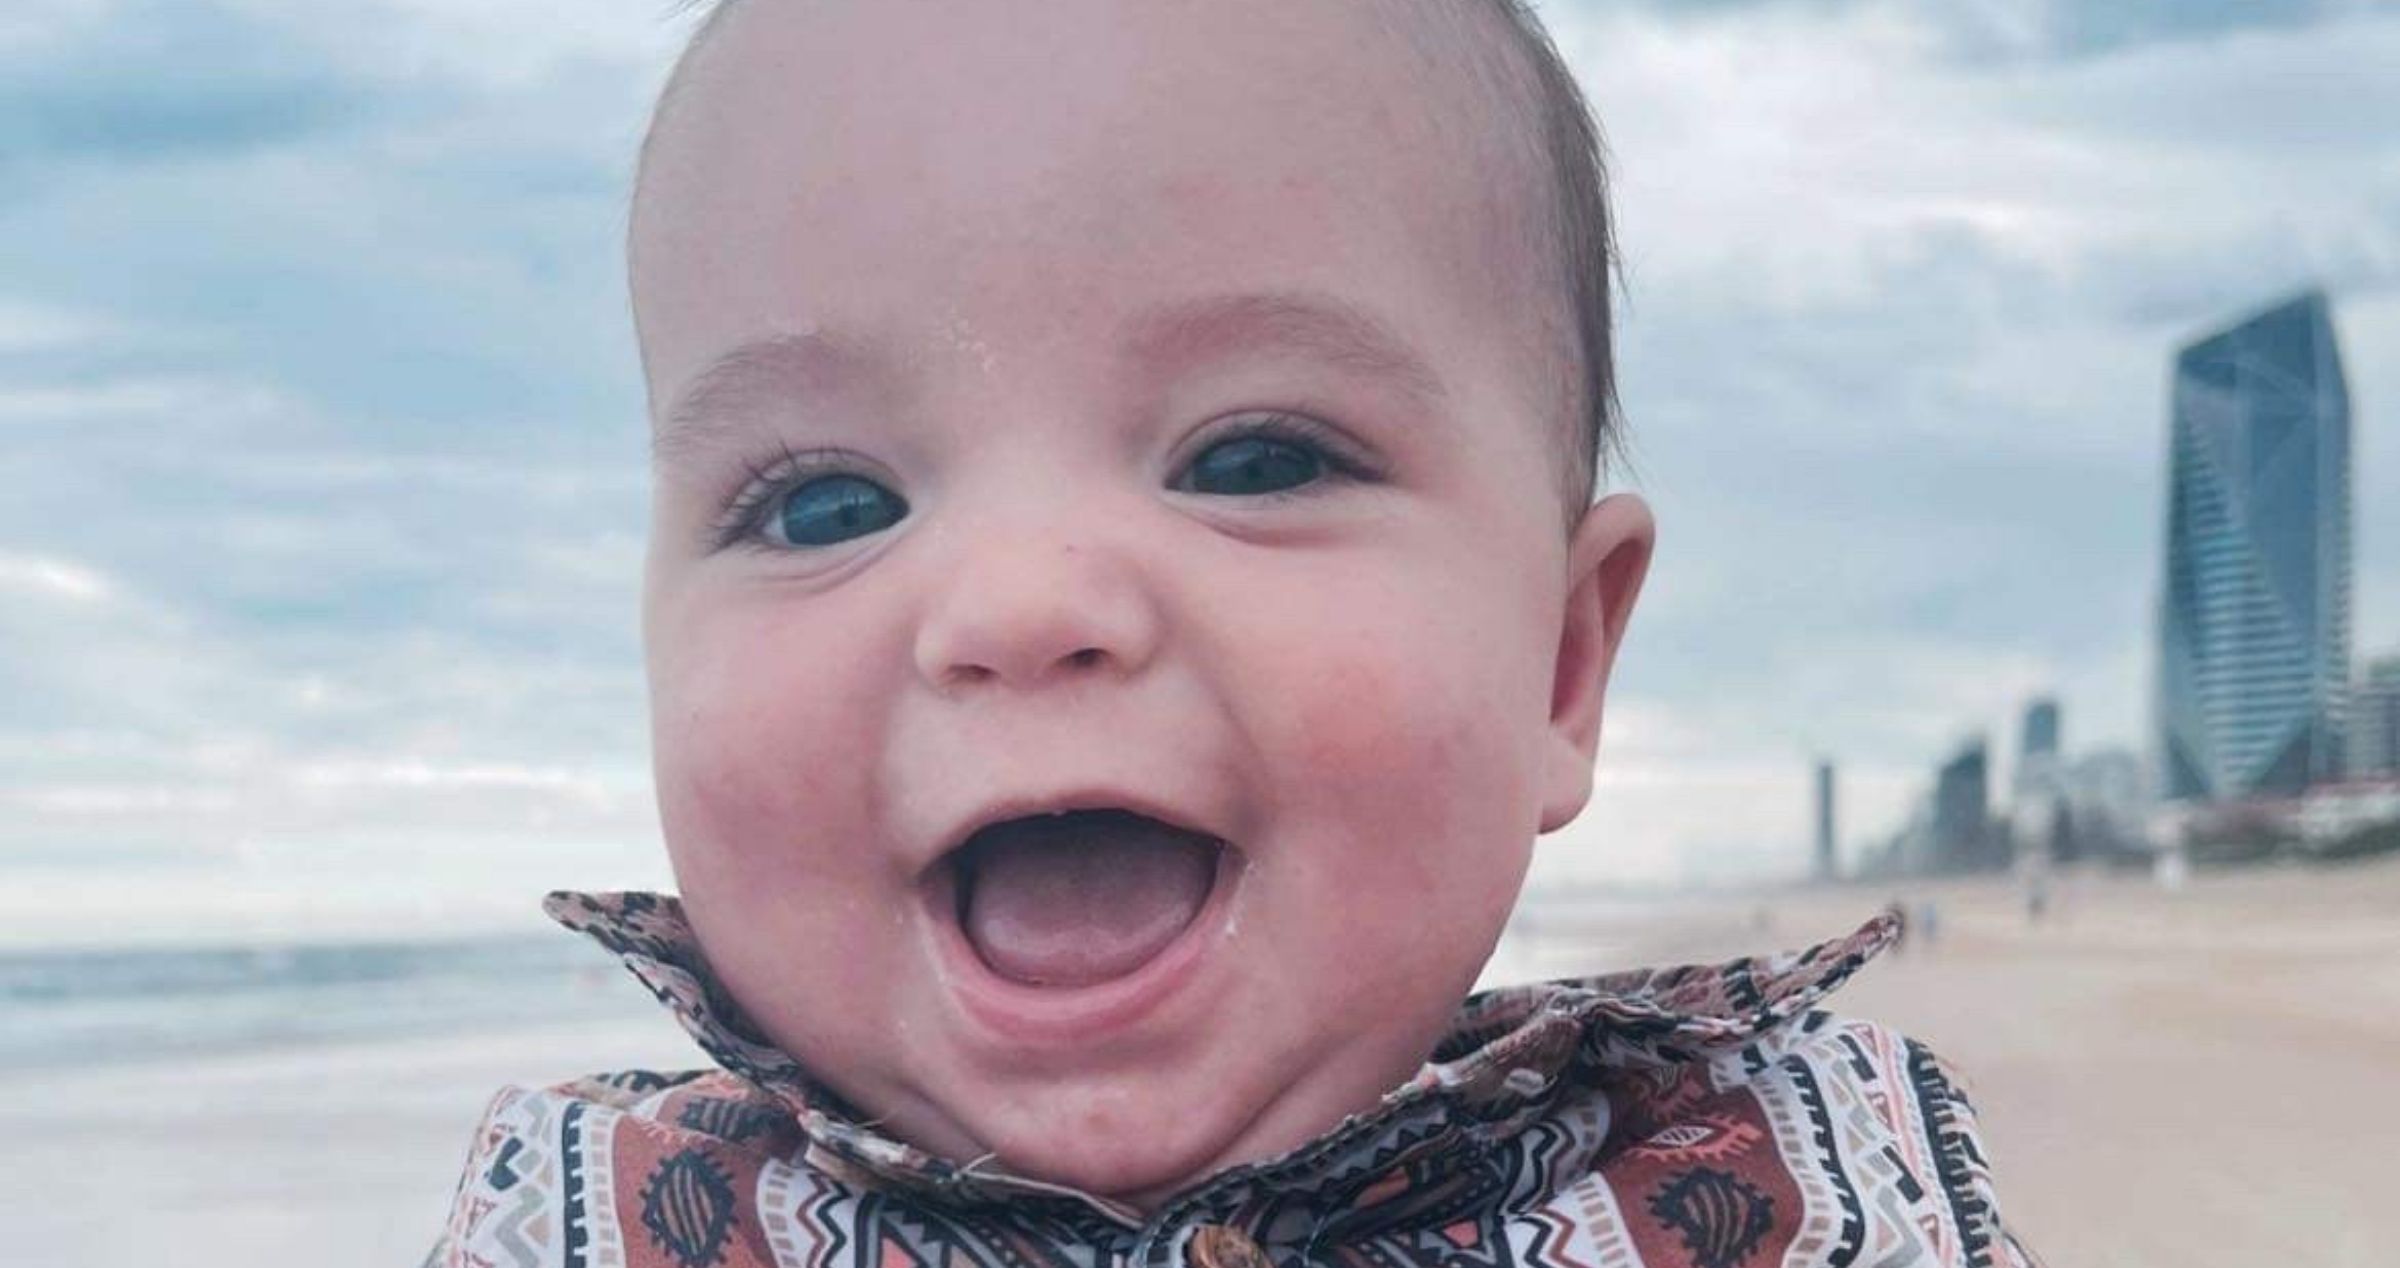 Image of smiling baby boy with beach in background